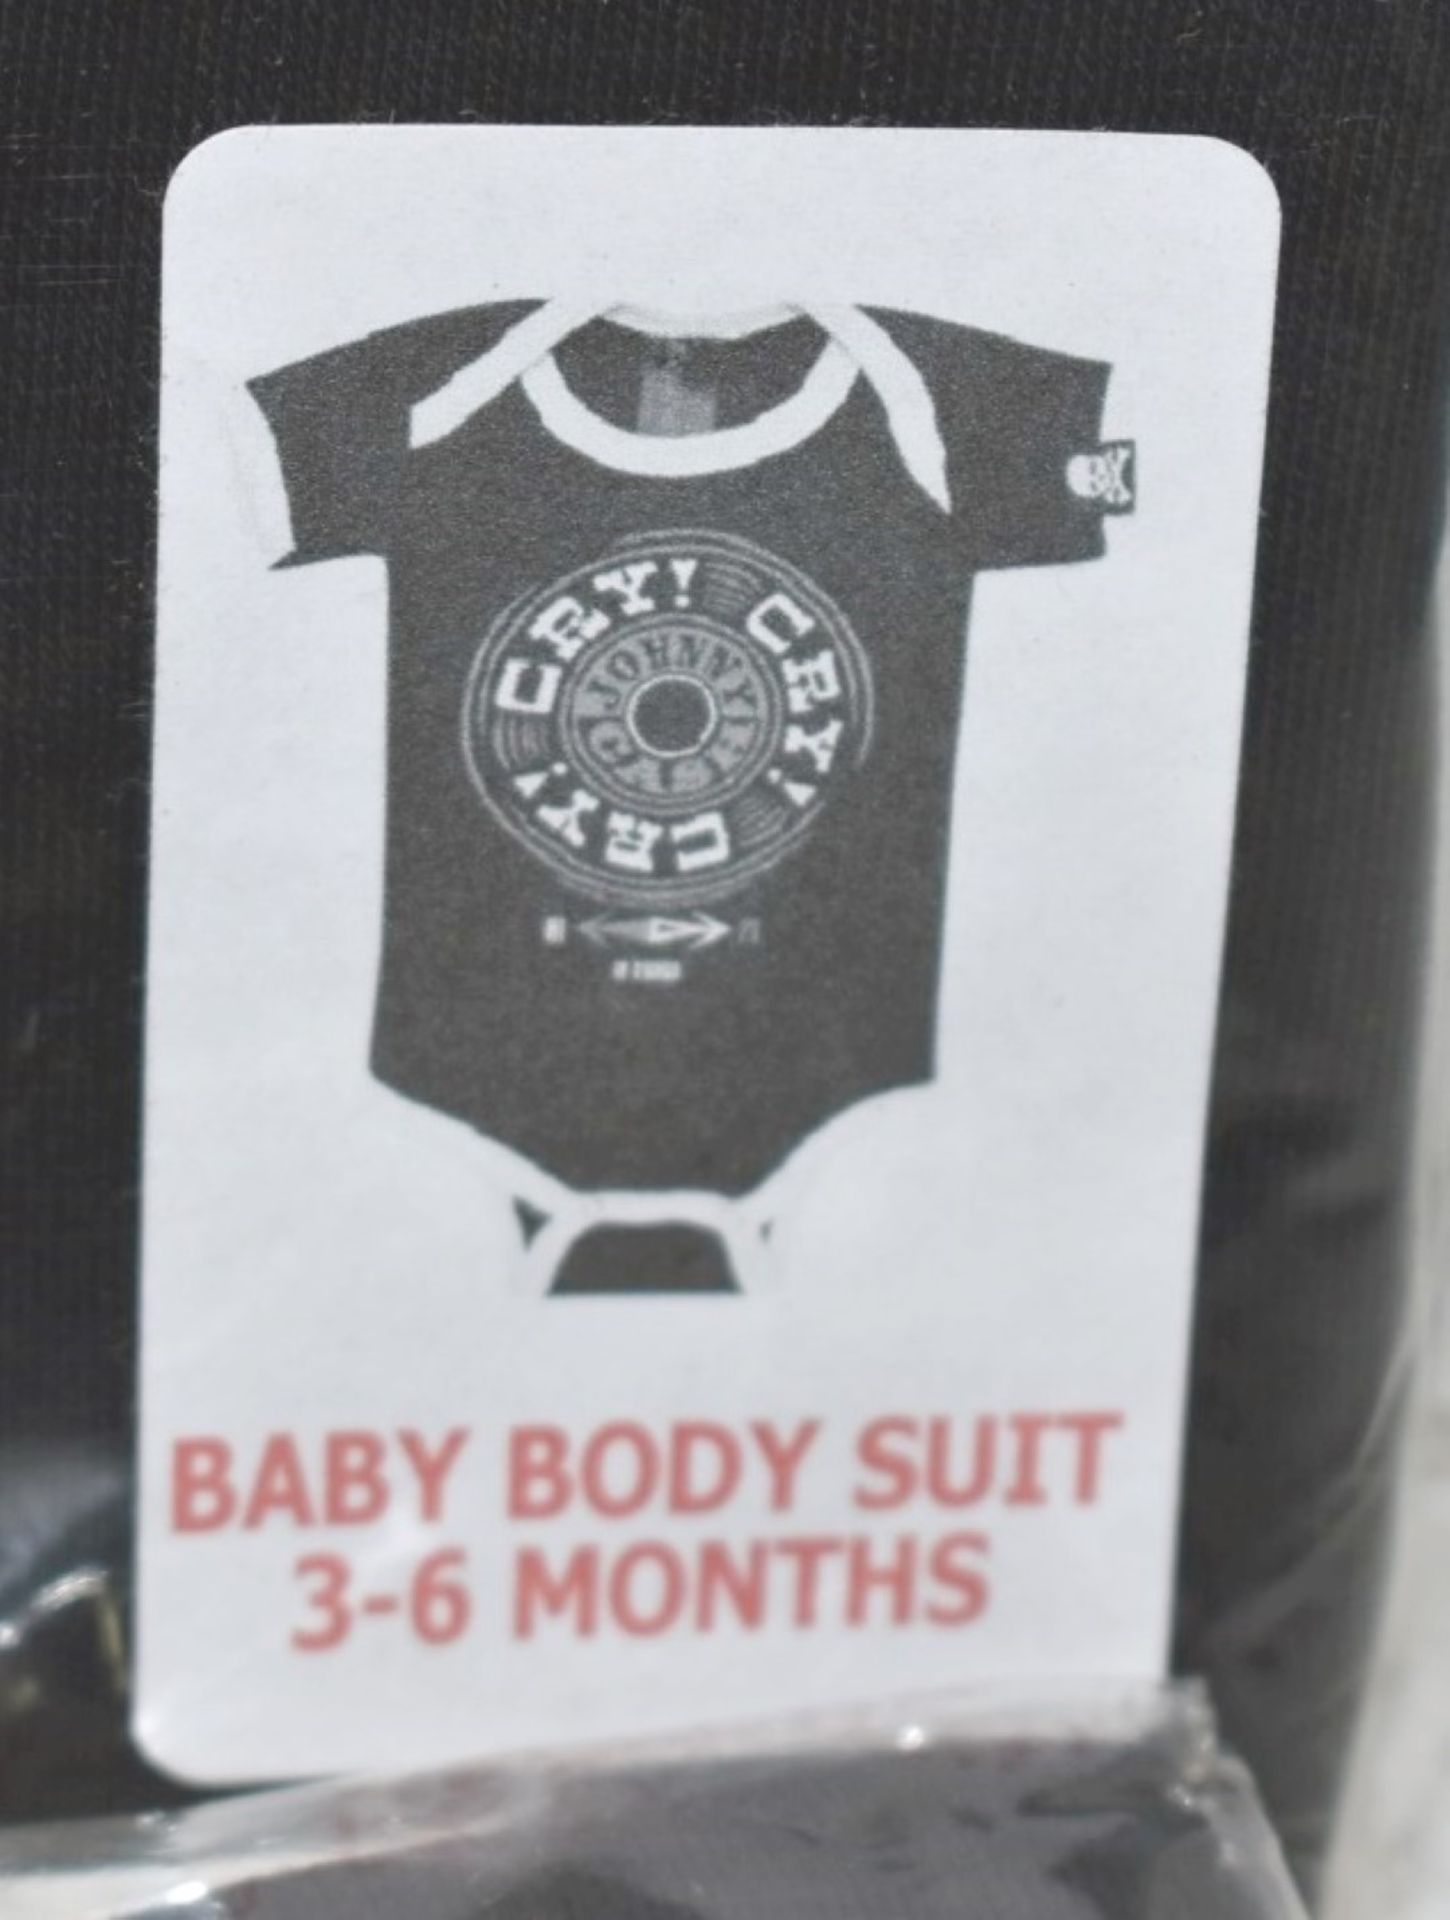 4 x Assorted Baby Body Suits - Features Johnny Cash and the Ramones - Size: 3 to 6 Months - - Image 6 of 8